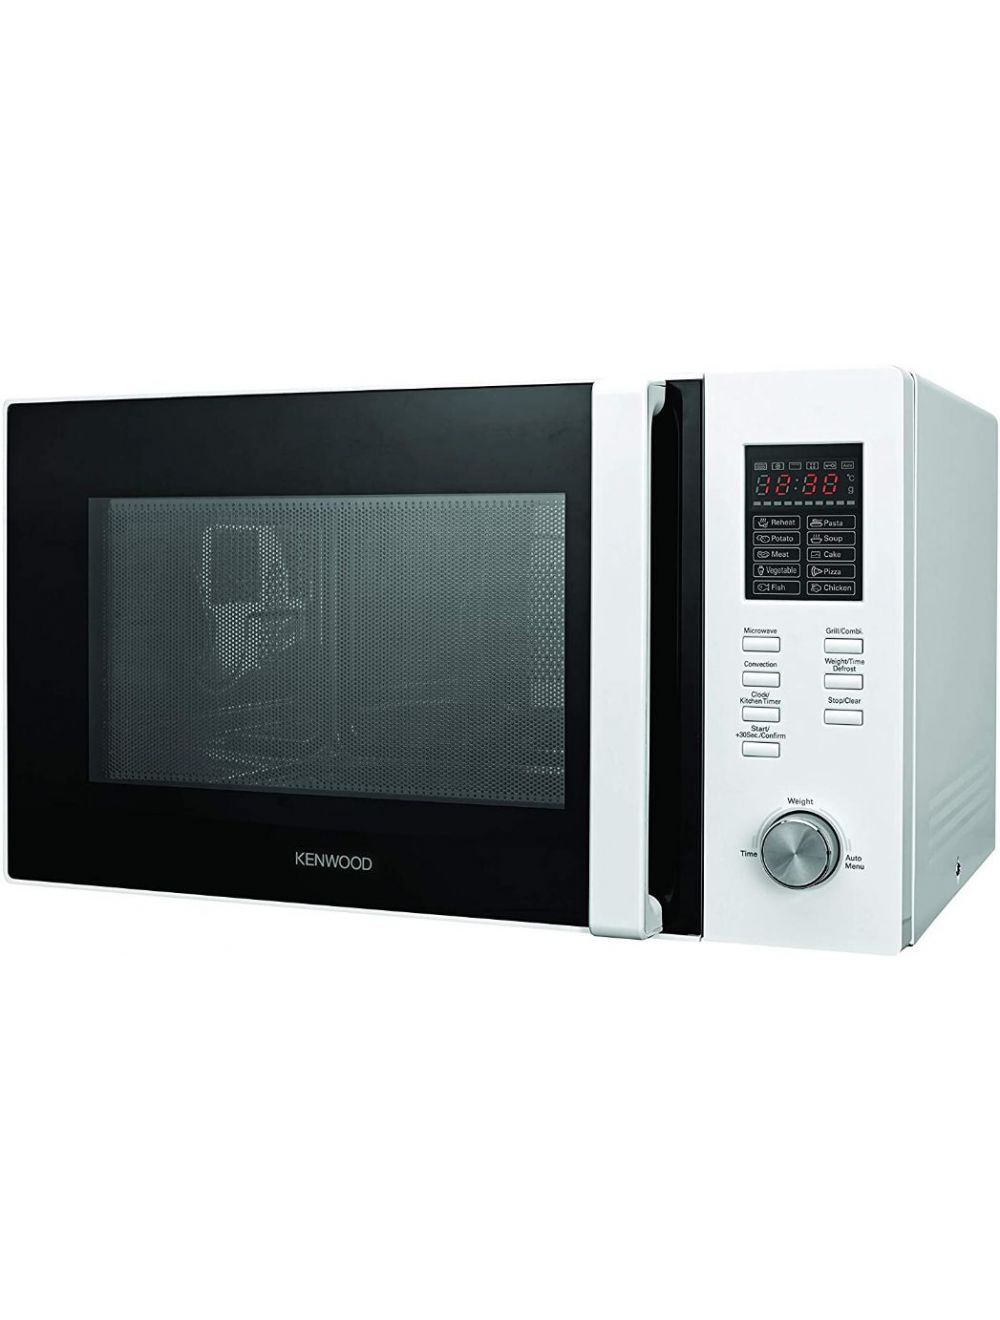 Kenwood 25 Litres Microwave Oven White-MWL220